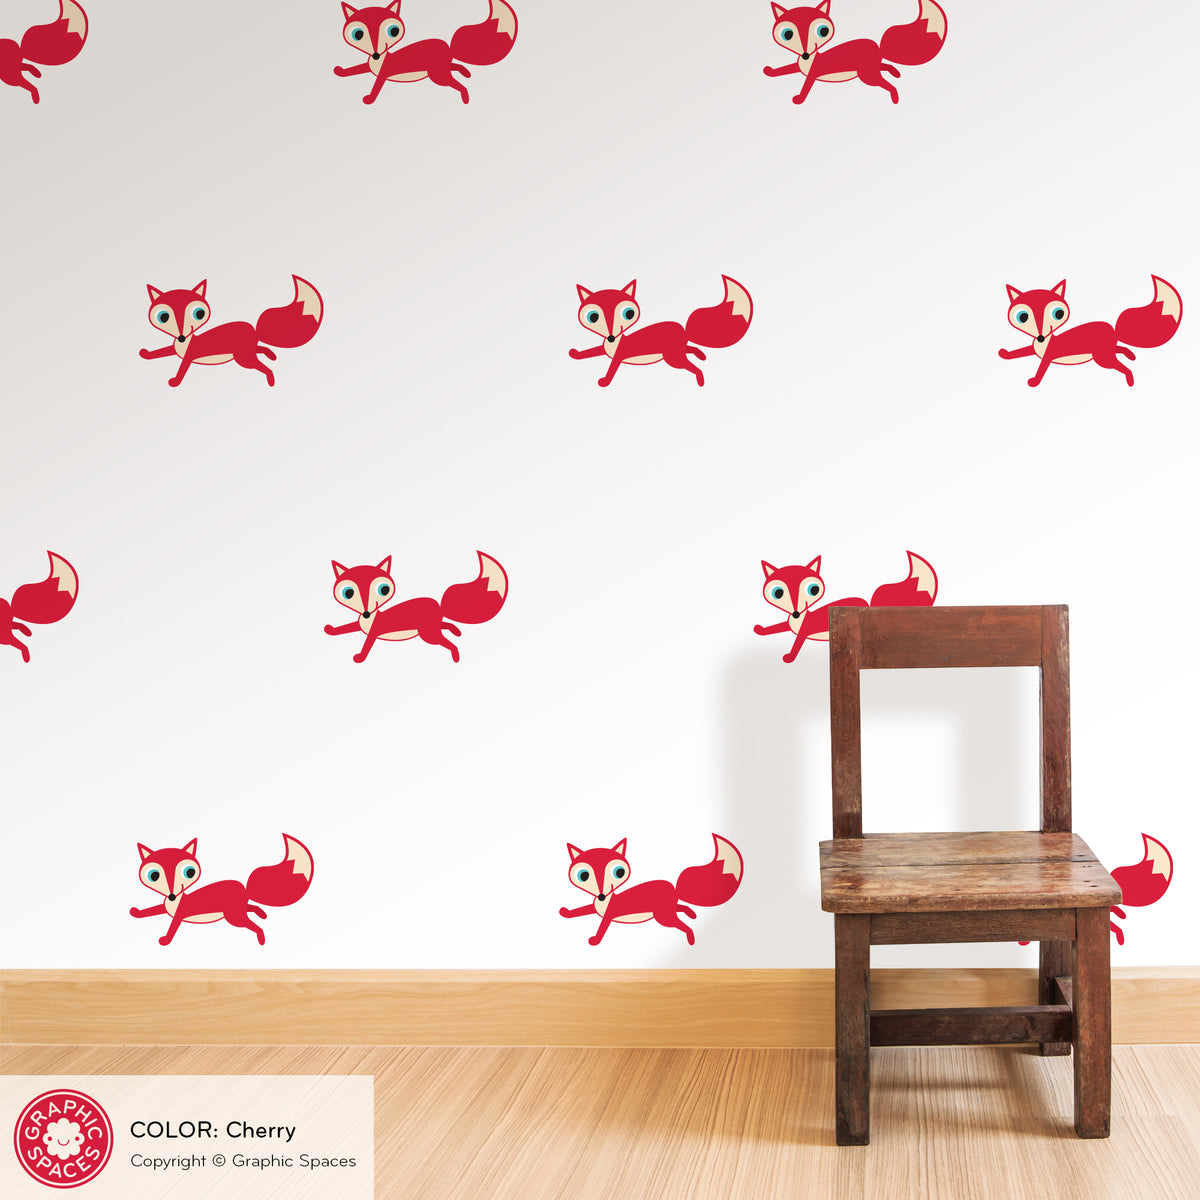 Fox Scatter Fabric Wall Decals - Pack of 20